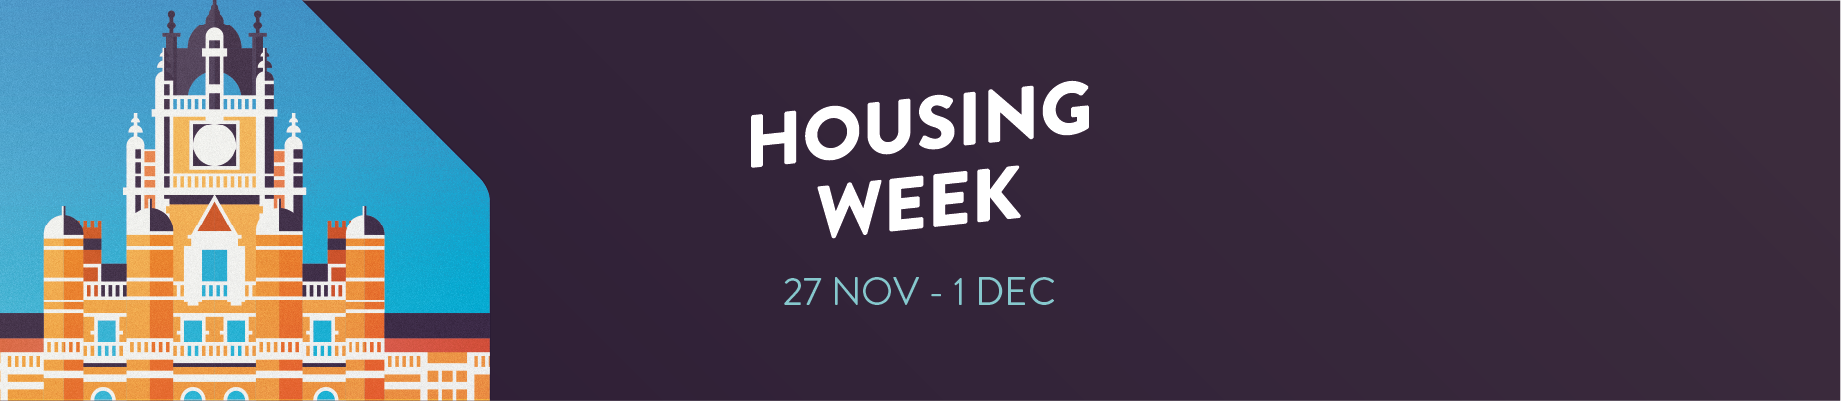 Image of Founder's Building, text reads Housing Week, 28 Nov-2 Dec